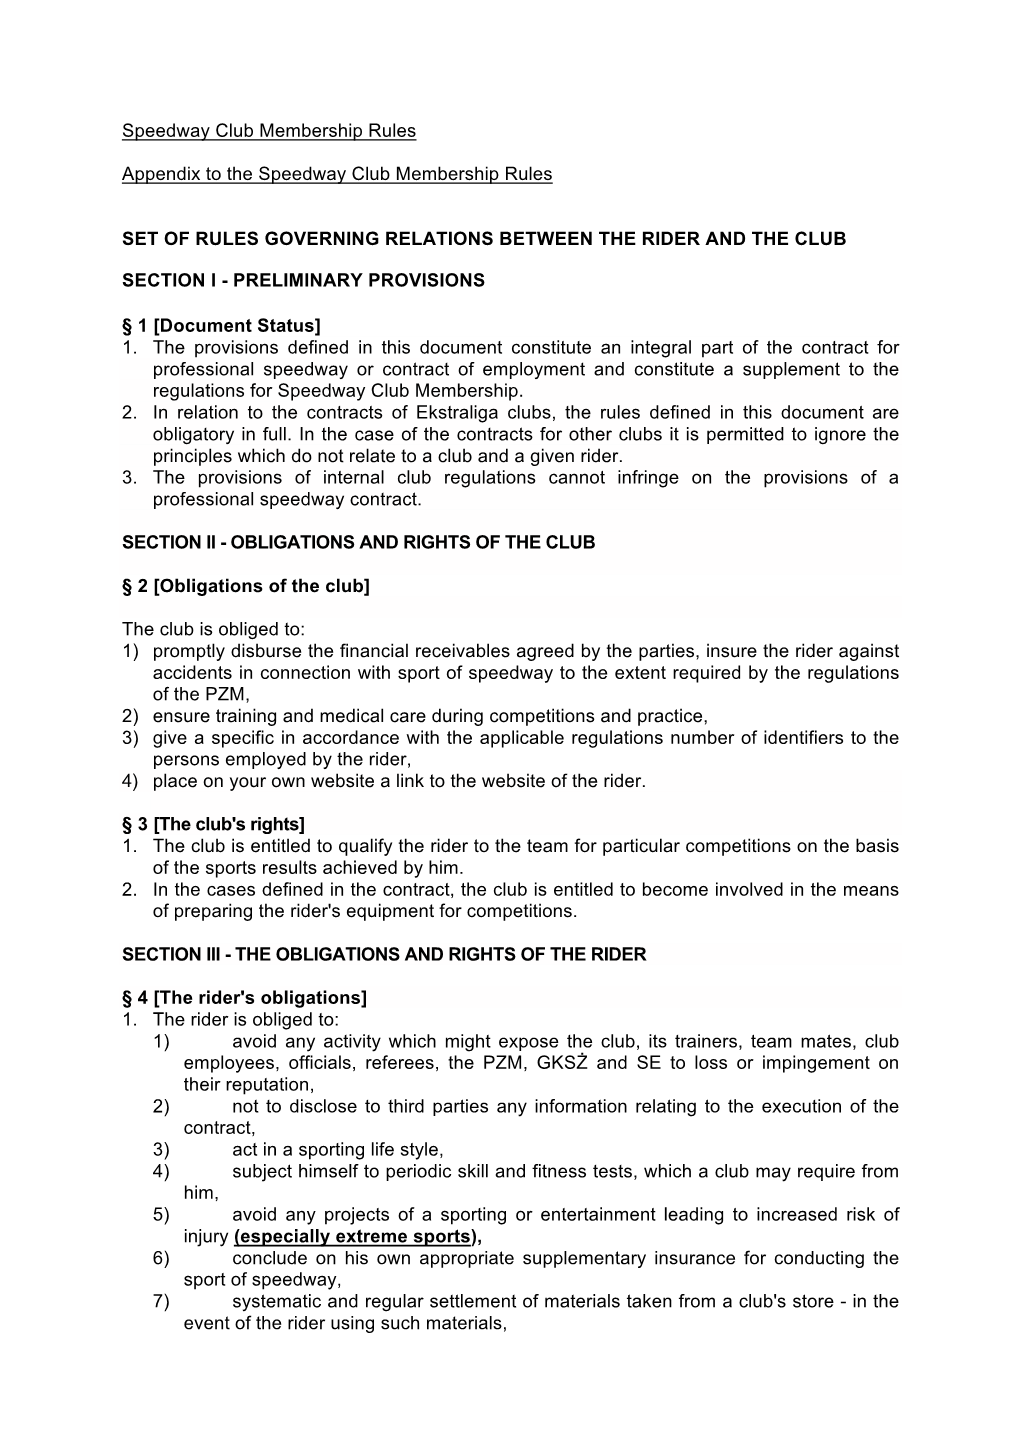 Speedway Club Membership Rules Appendix to the Speedway Club